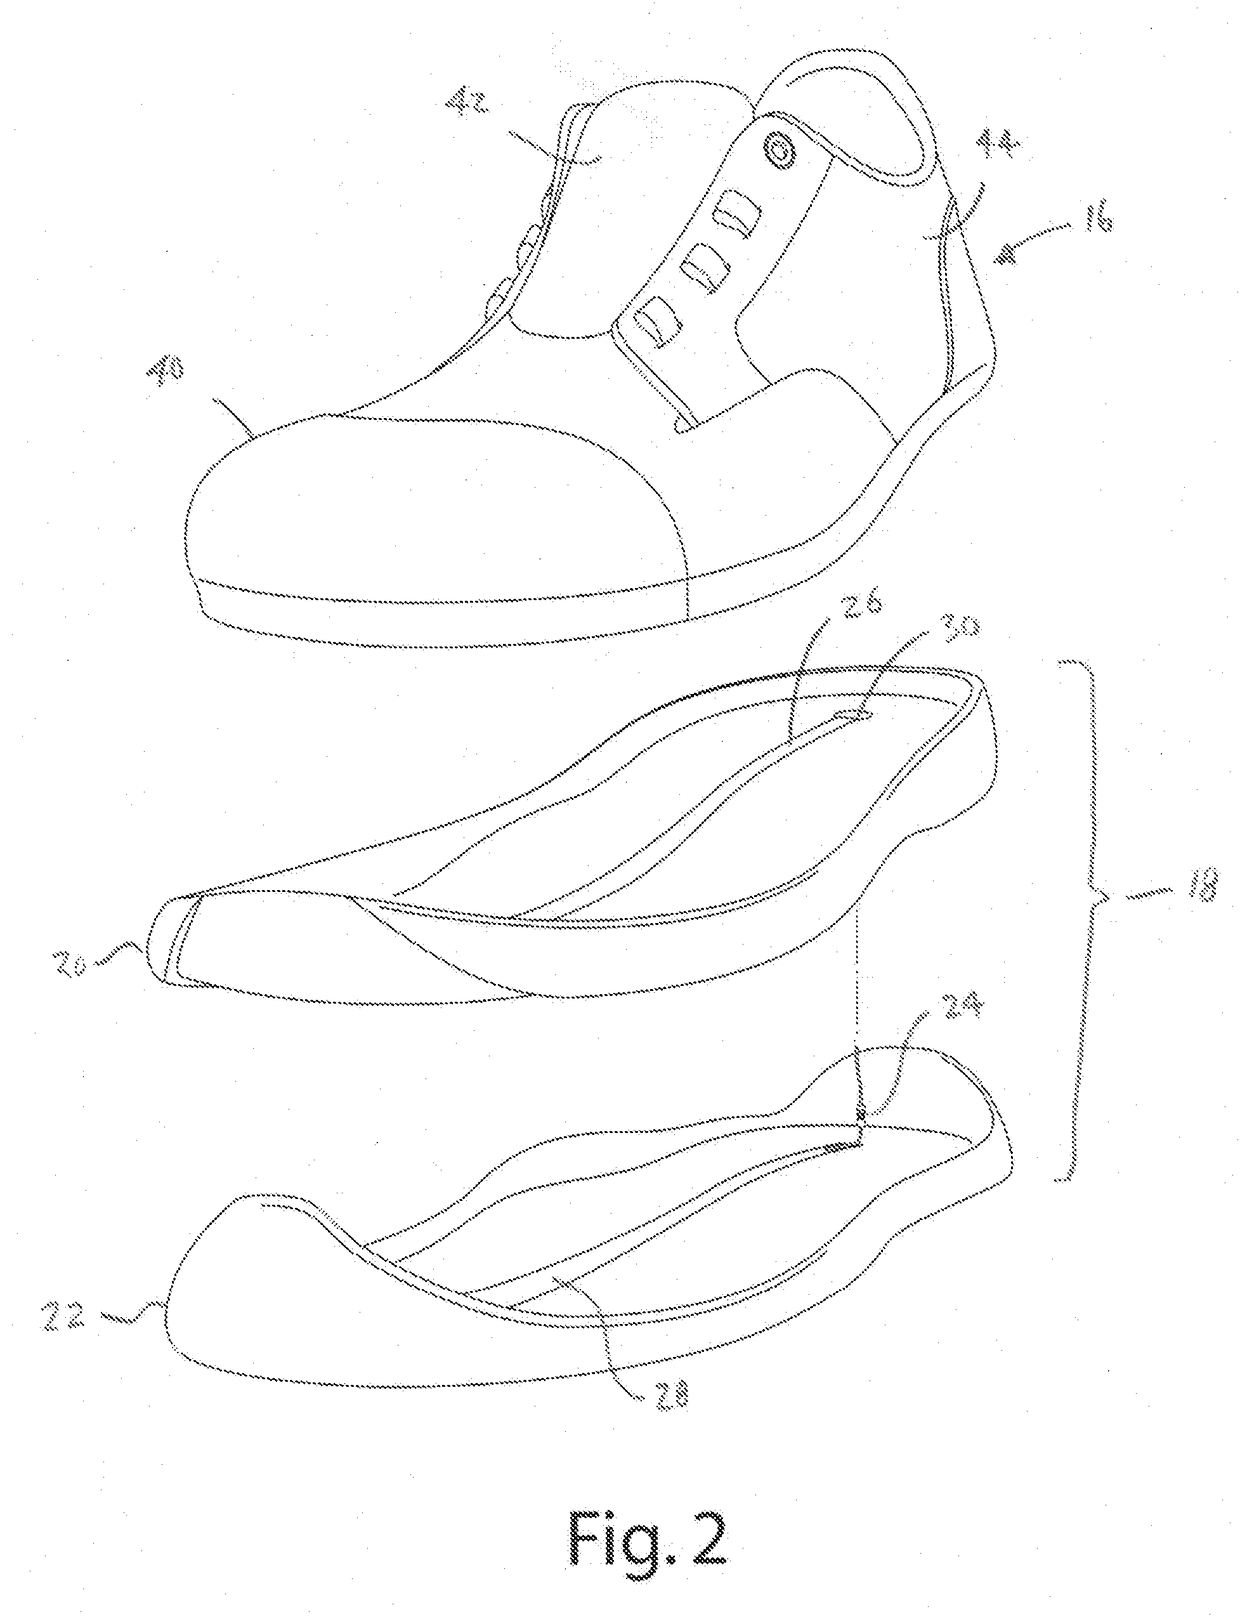 Static dissipating and conductive footwear